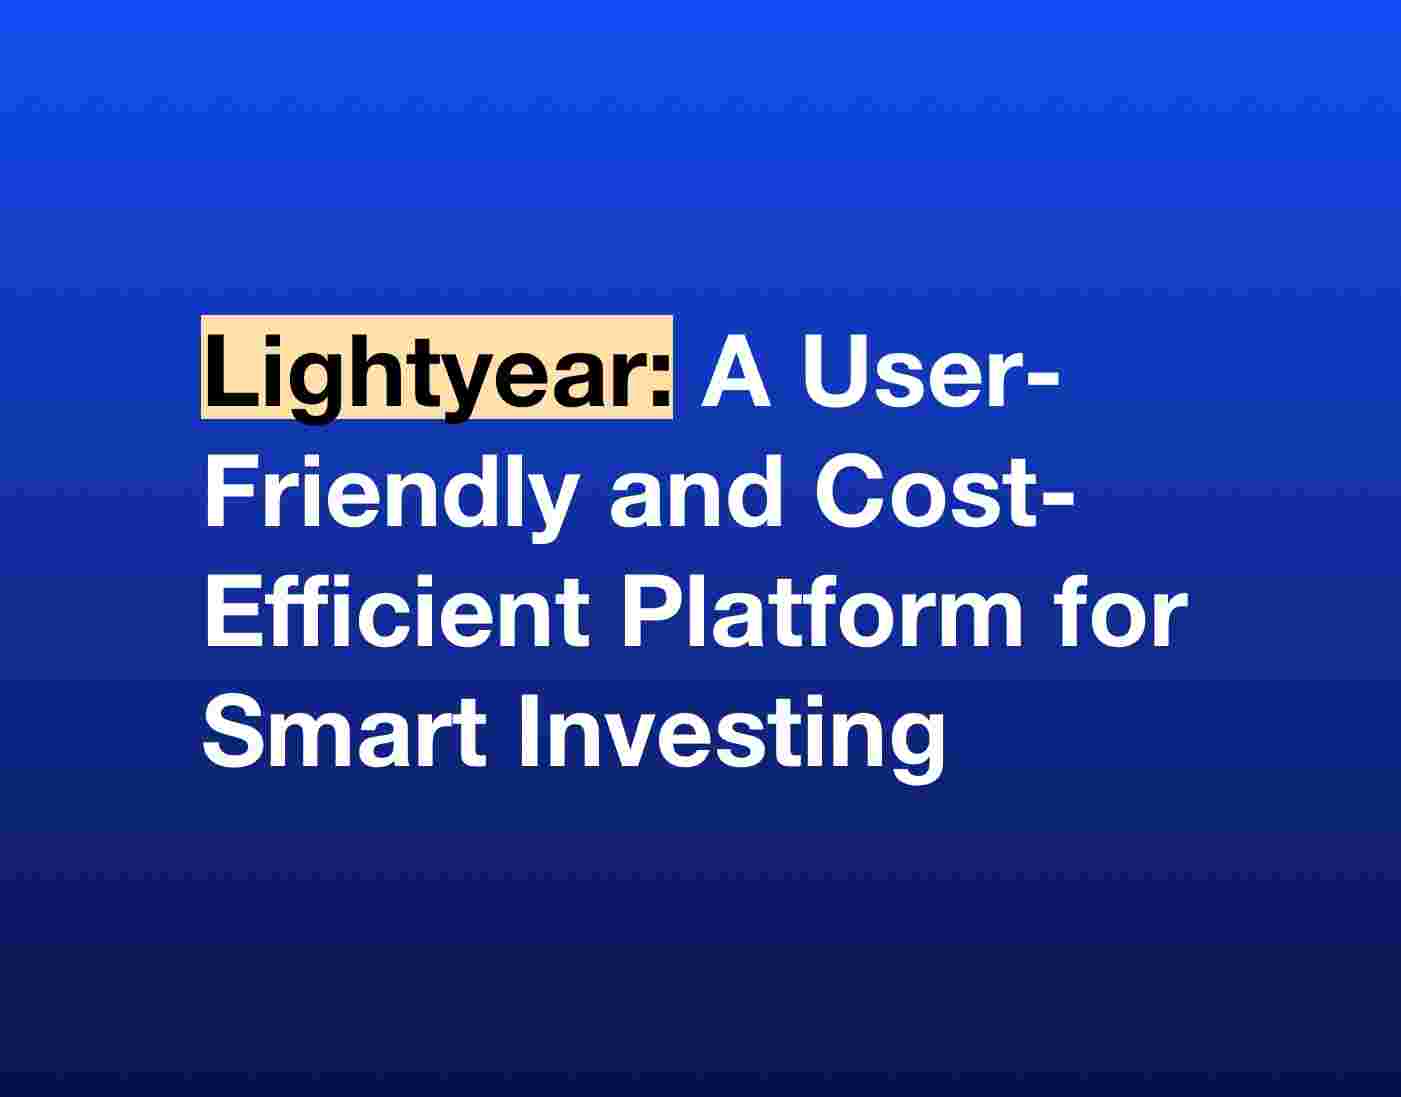 Lightyear: A User-Friendly and Cost-Efficient Platform for Smart Investing